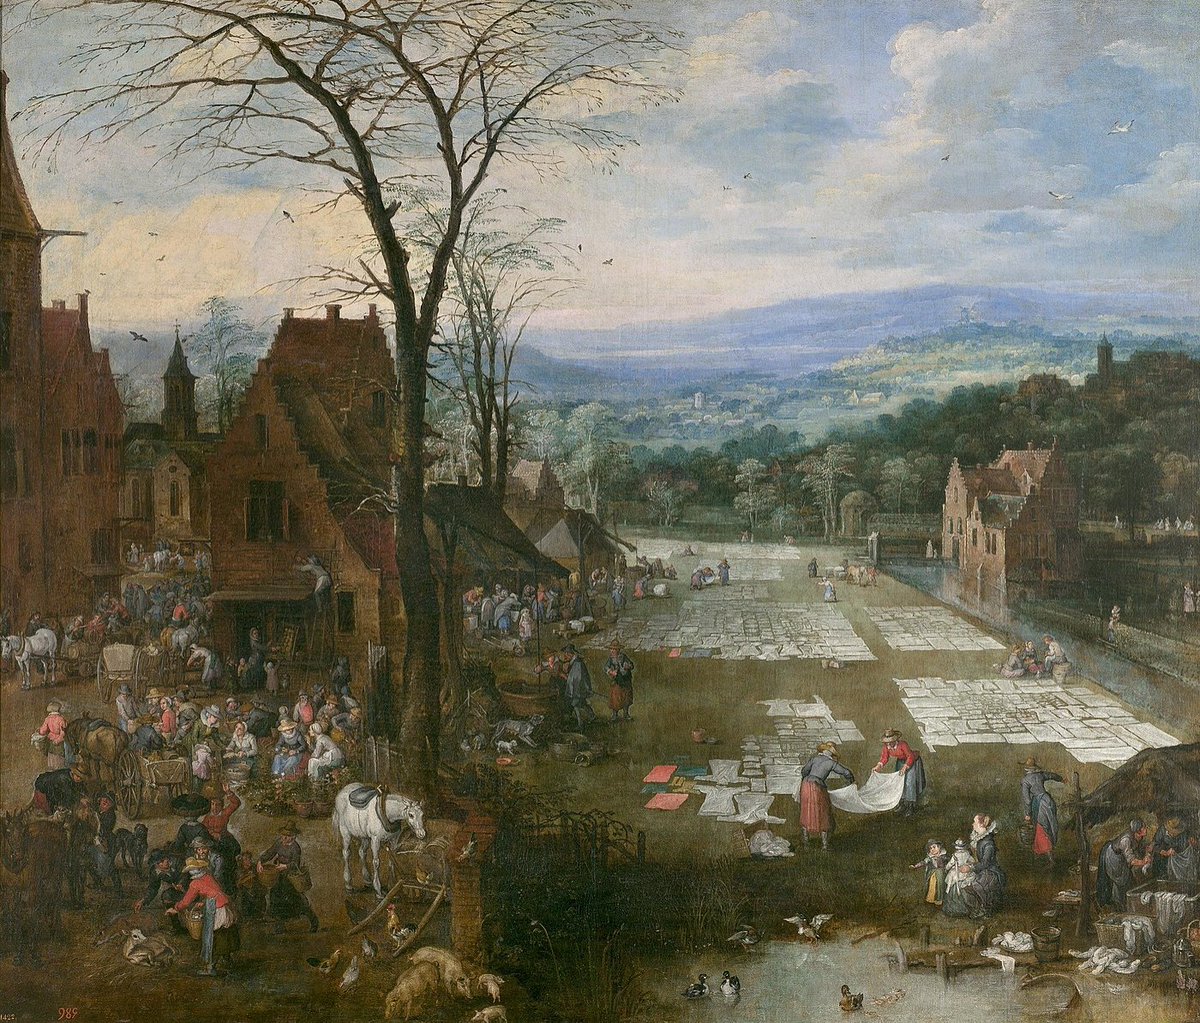 And this scene depicted by Jan Brueghel seems a reasoned response to the light before him.